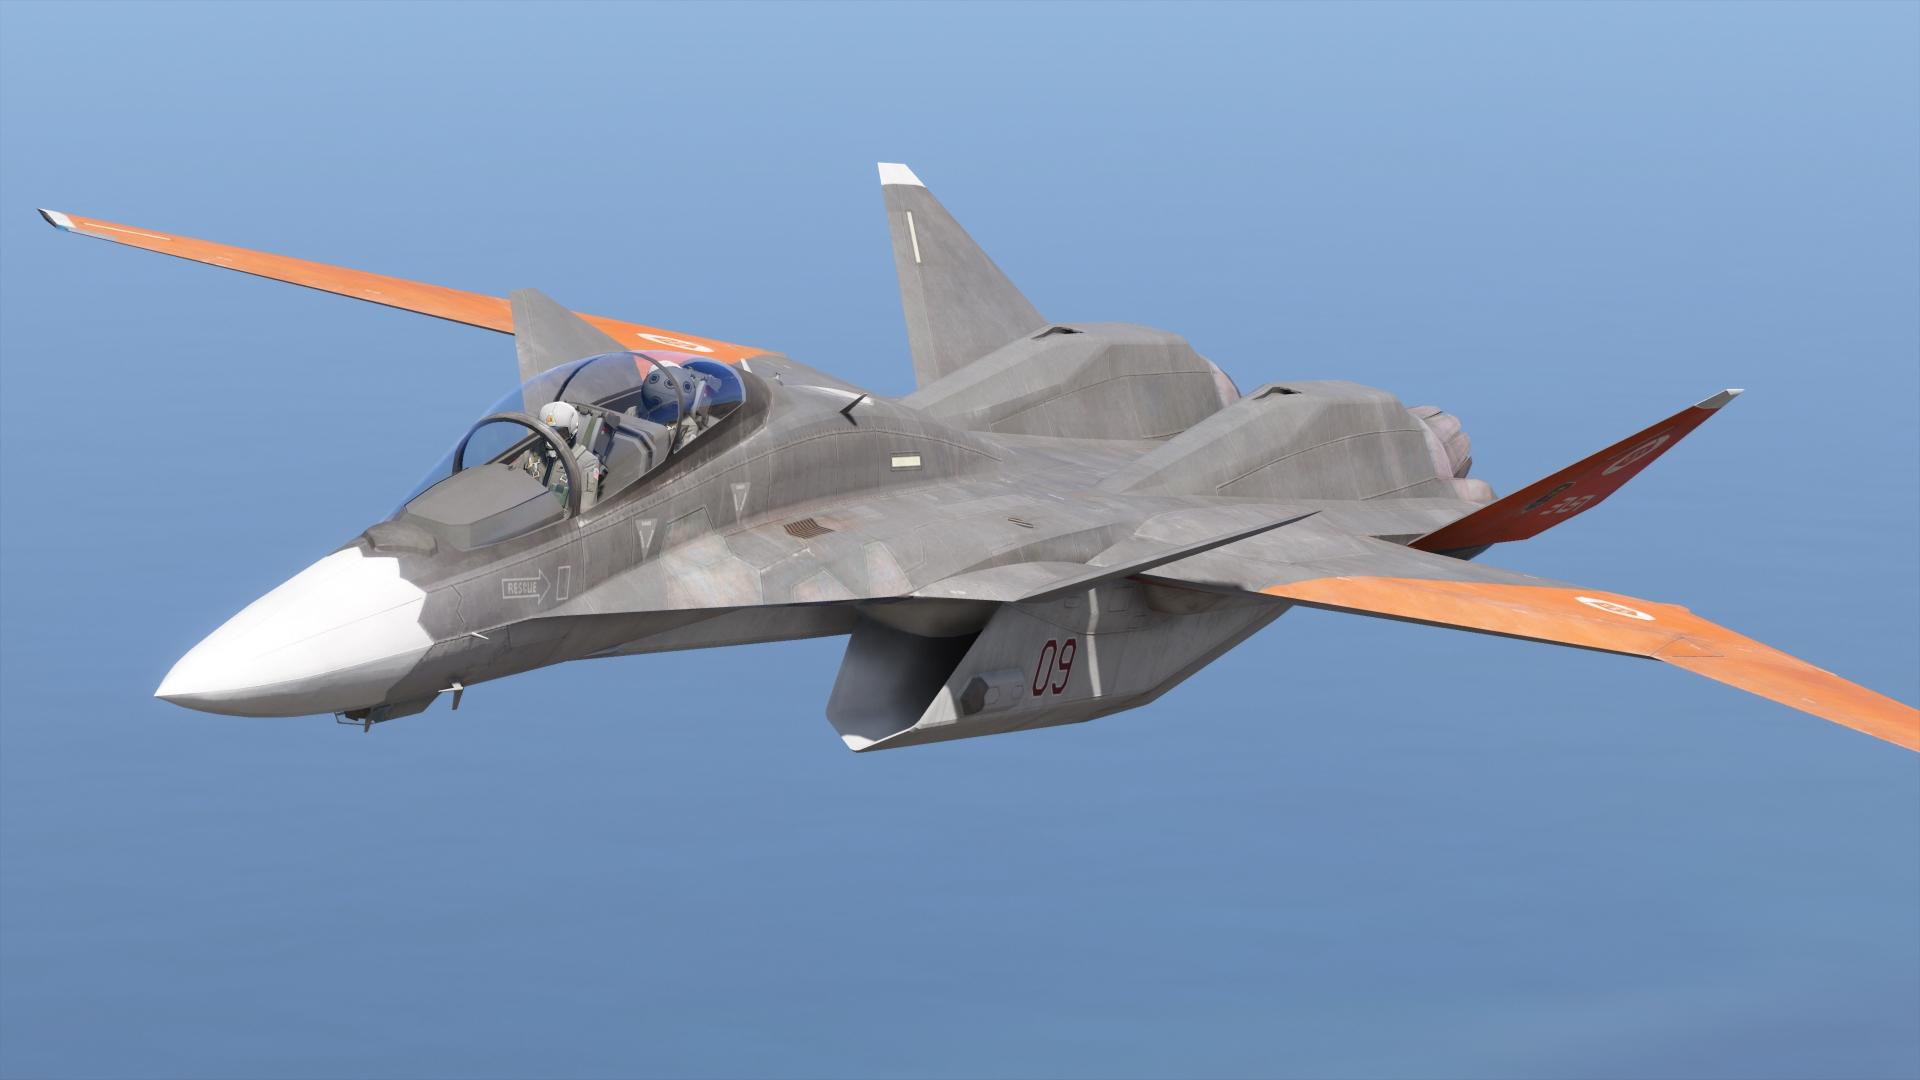 Here is another classy fictional superplane of the Ace Combat series: The X-...